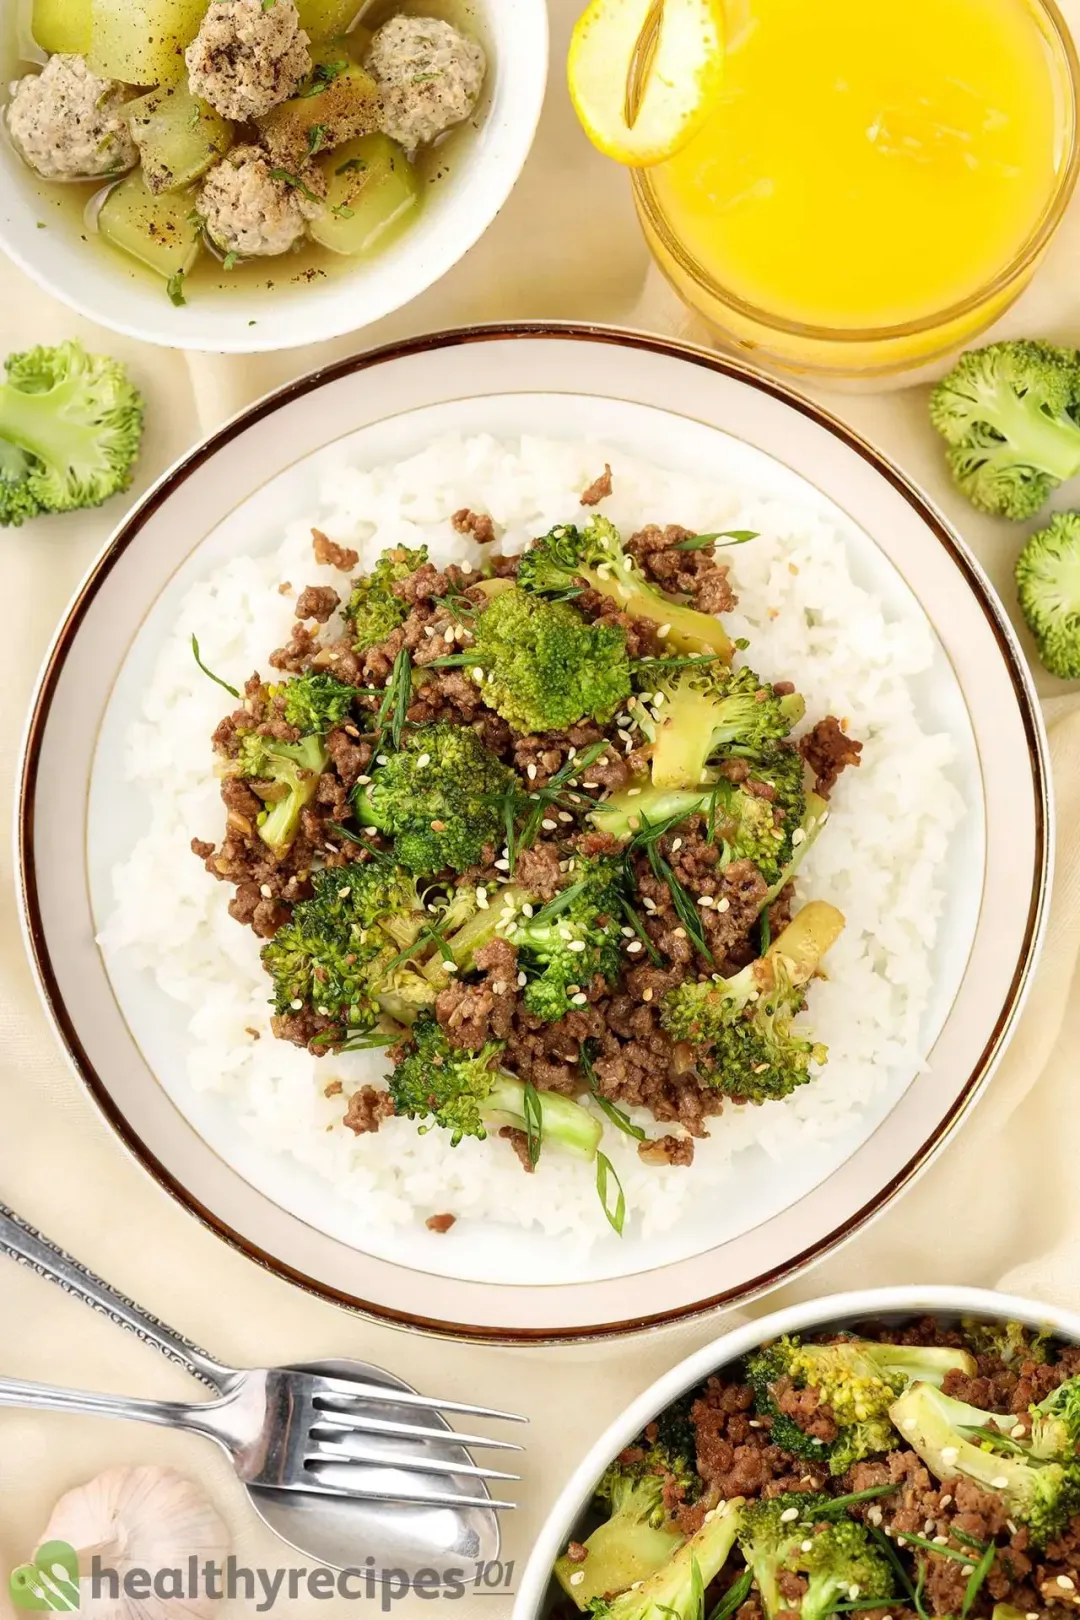 What to Serve With Ground Beef and Broccoli